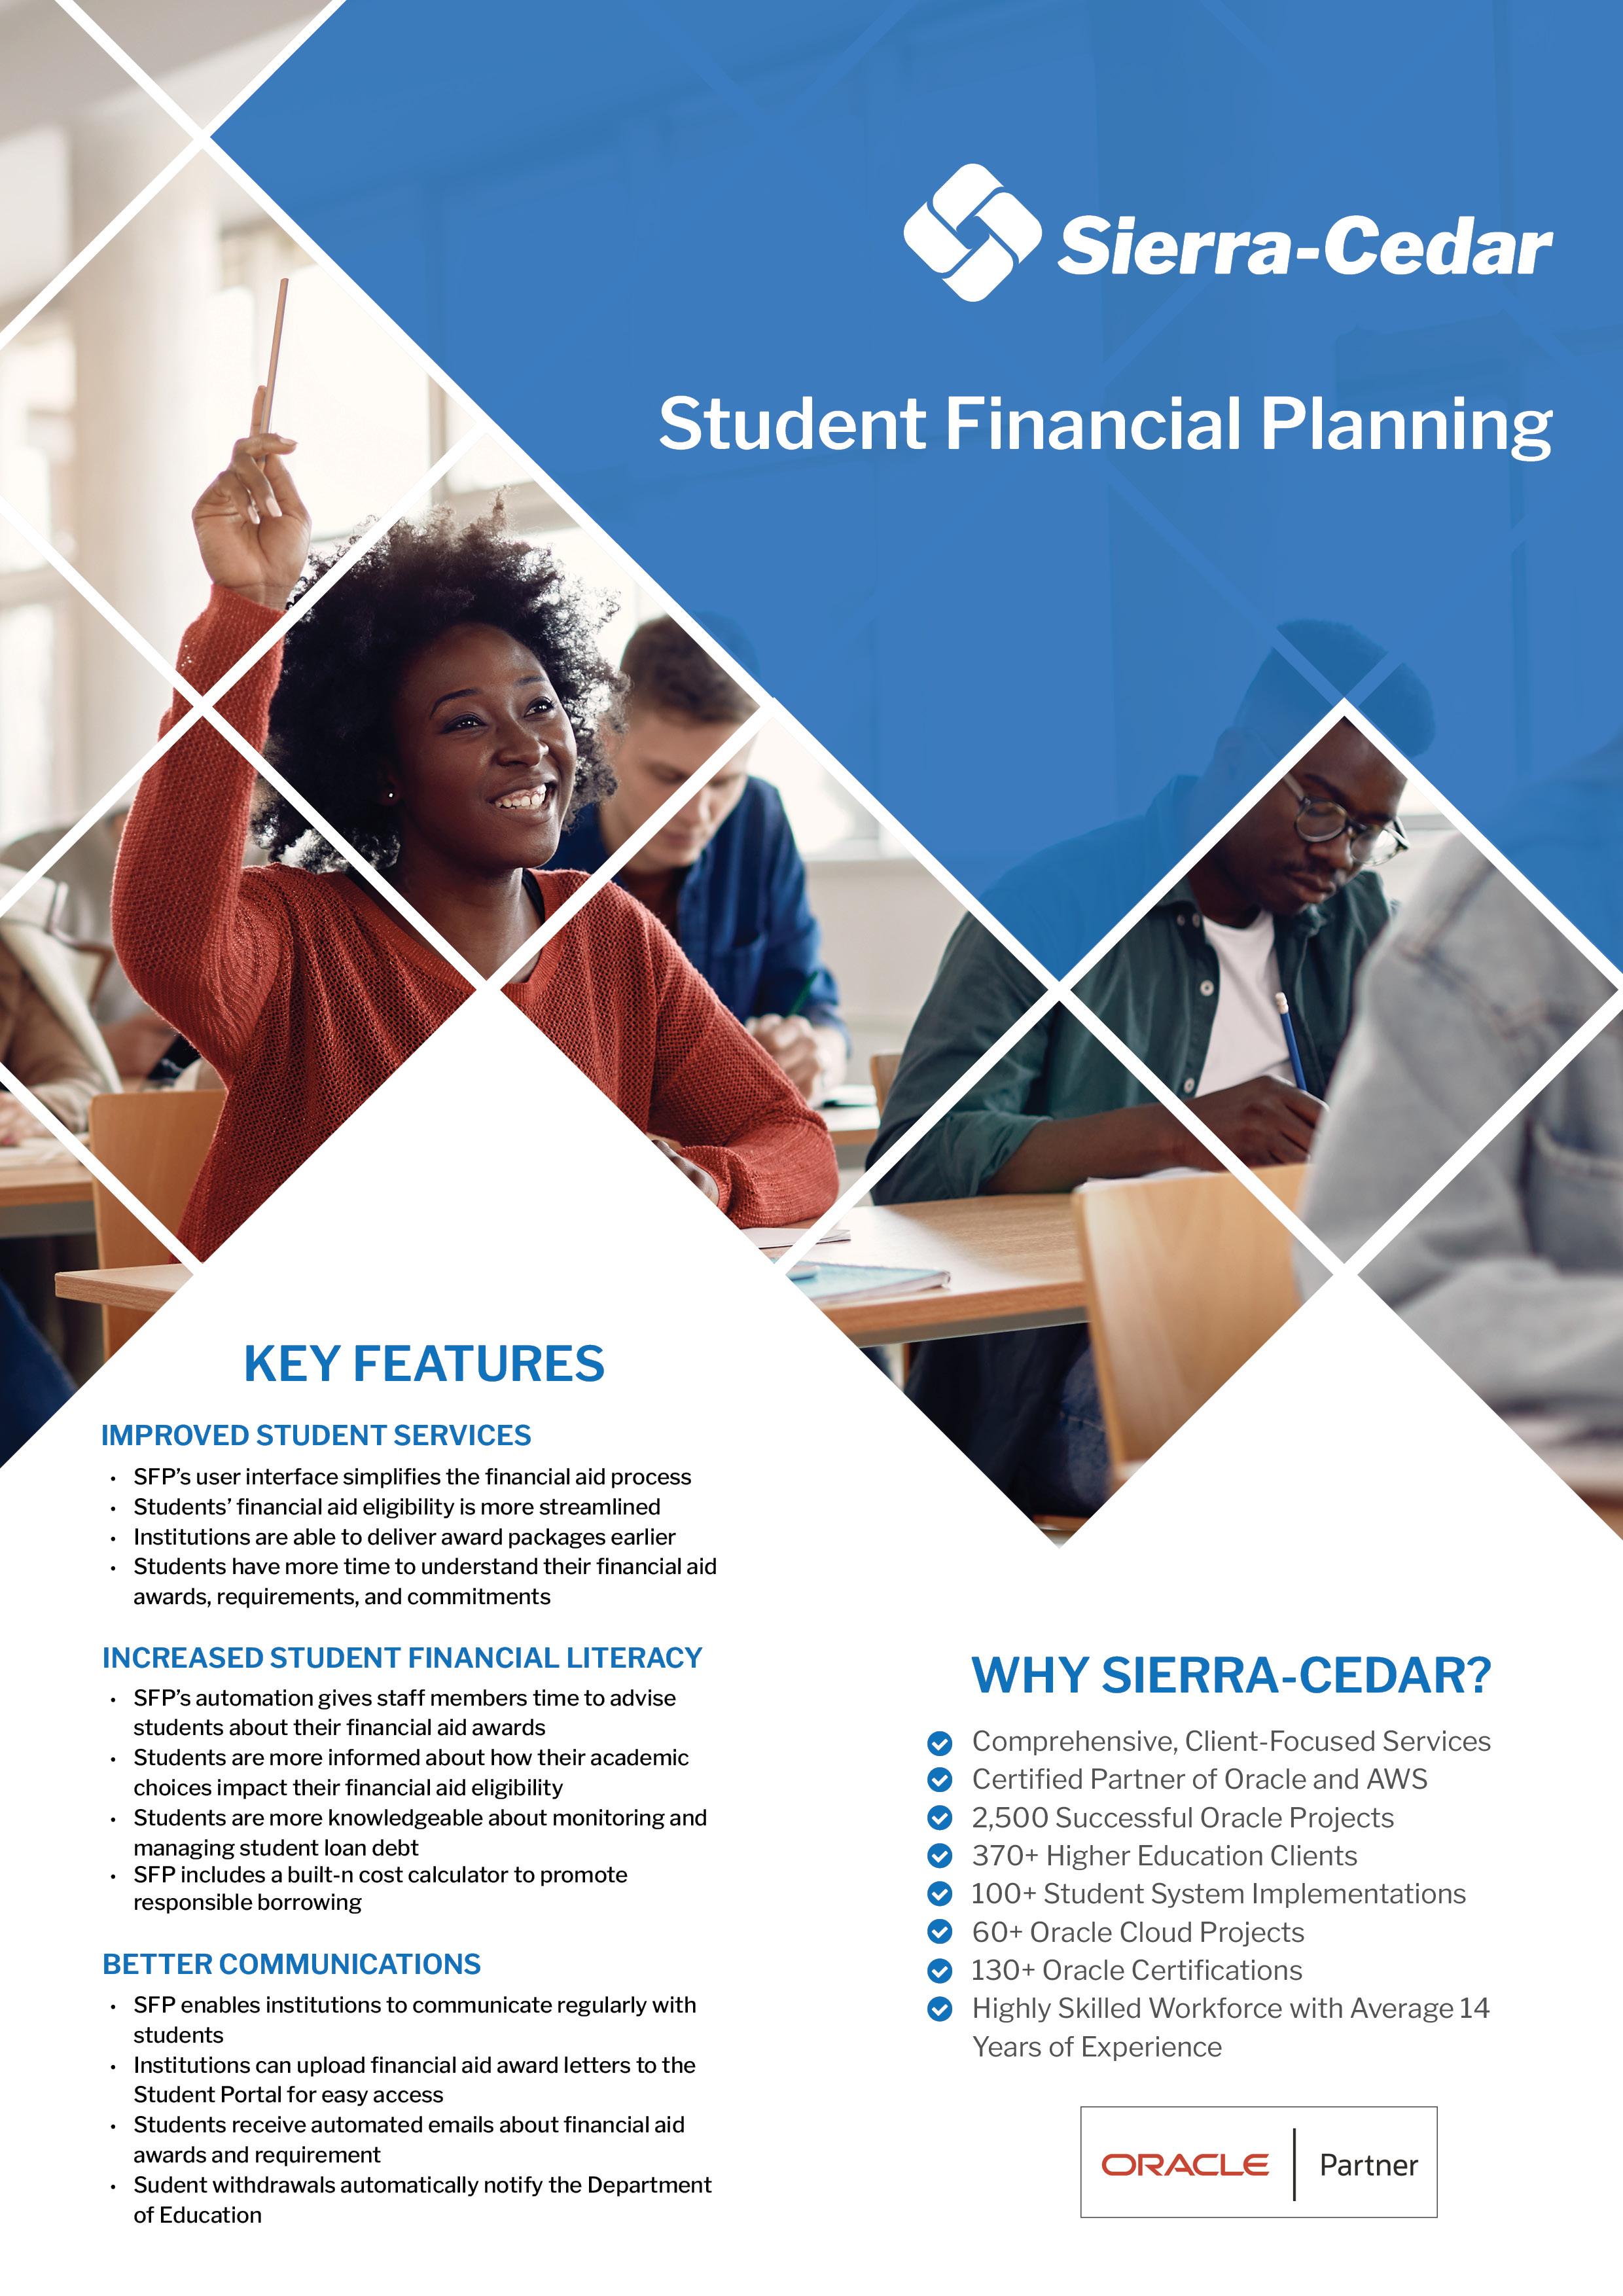 Oracle Student Financial Planning Consulting Services